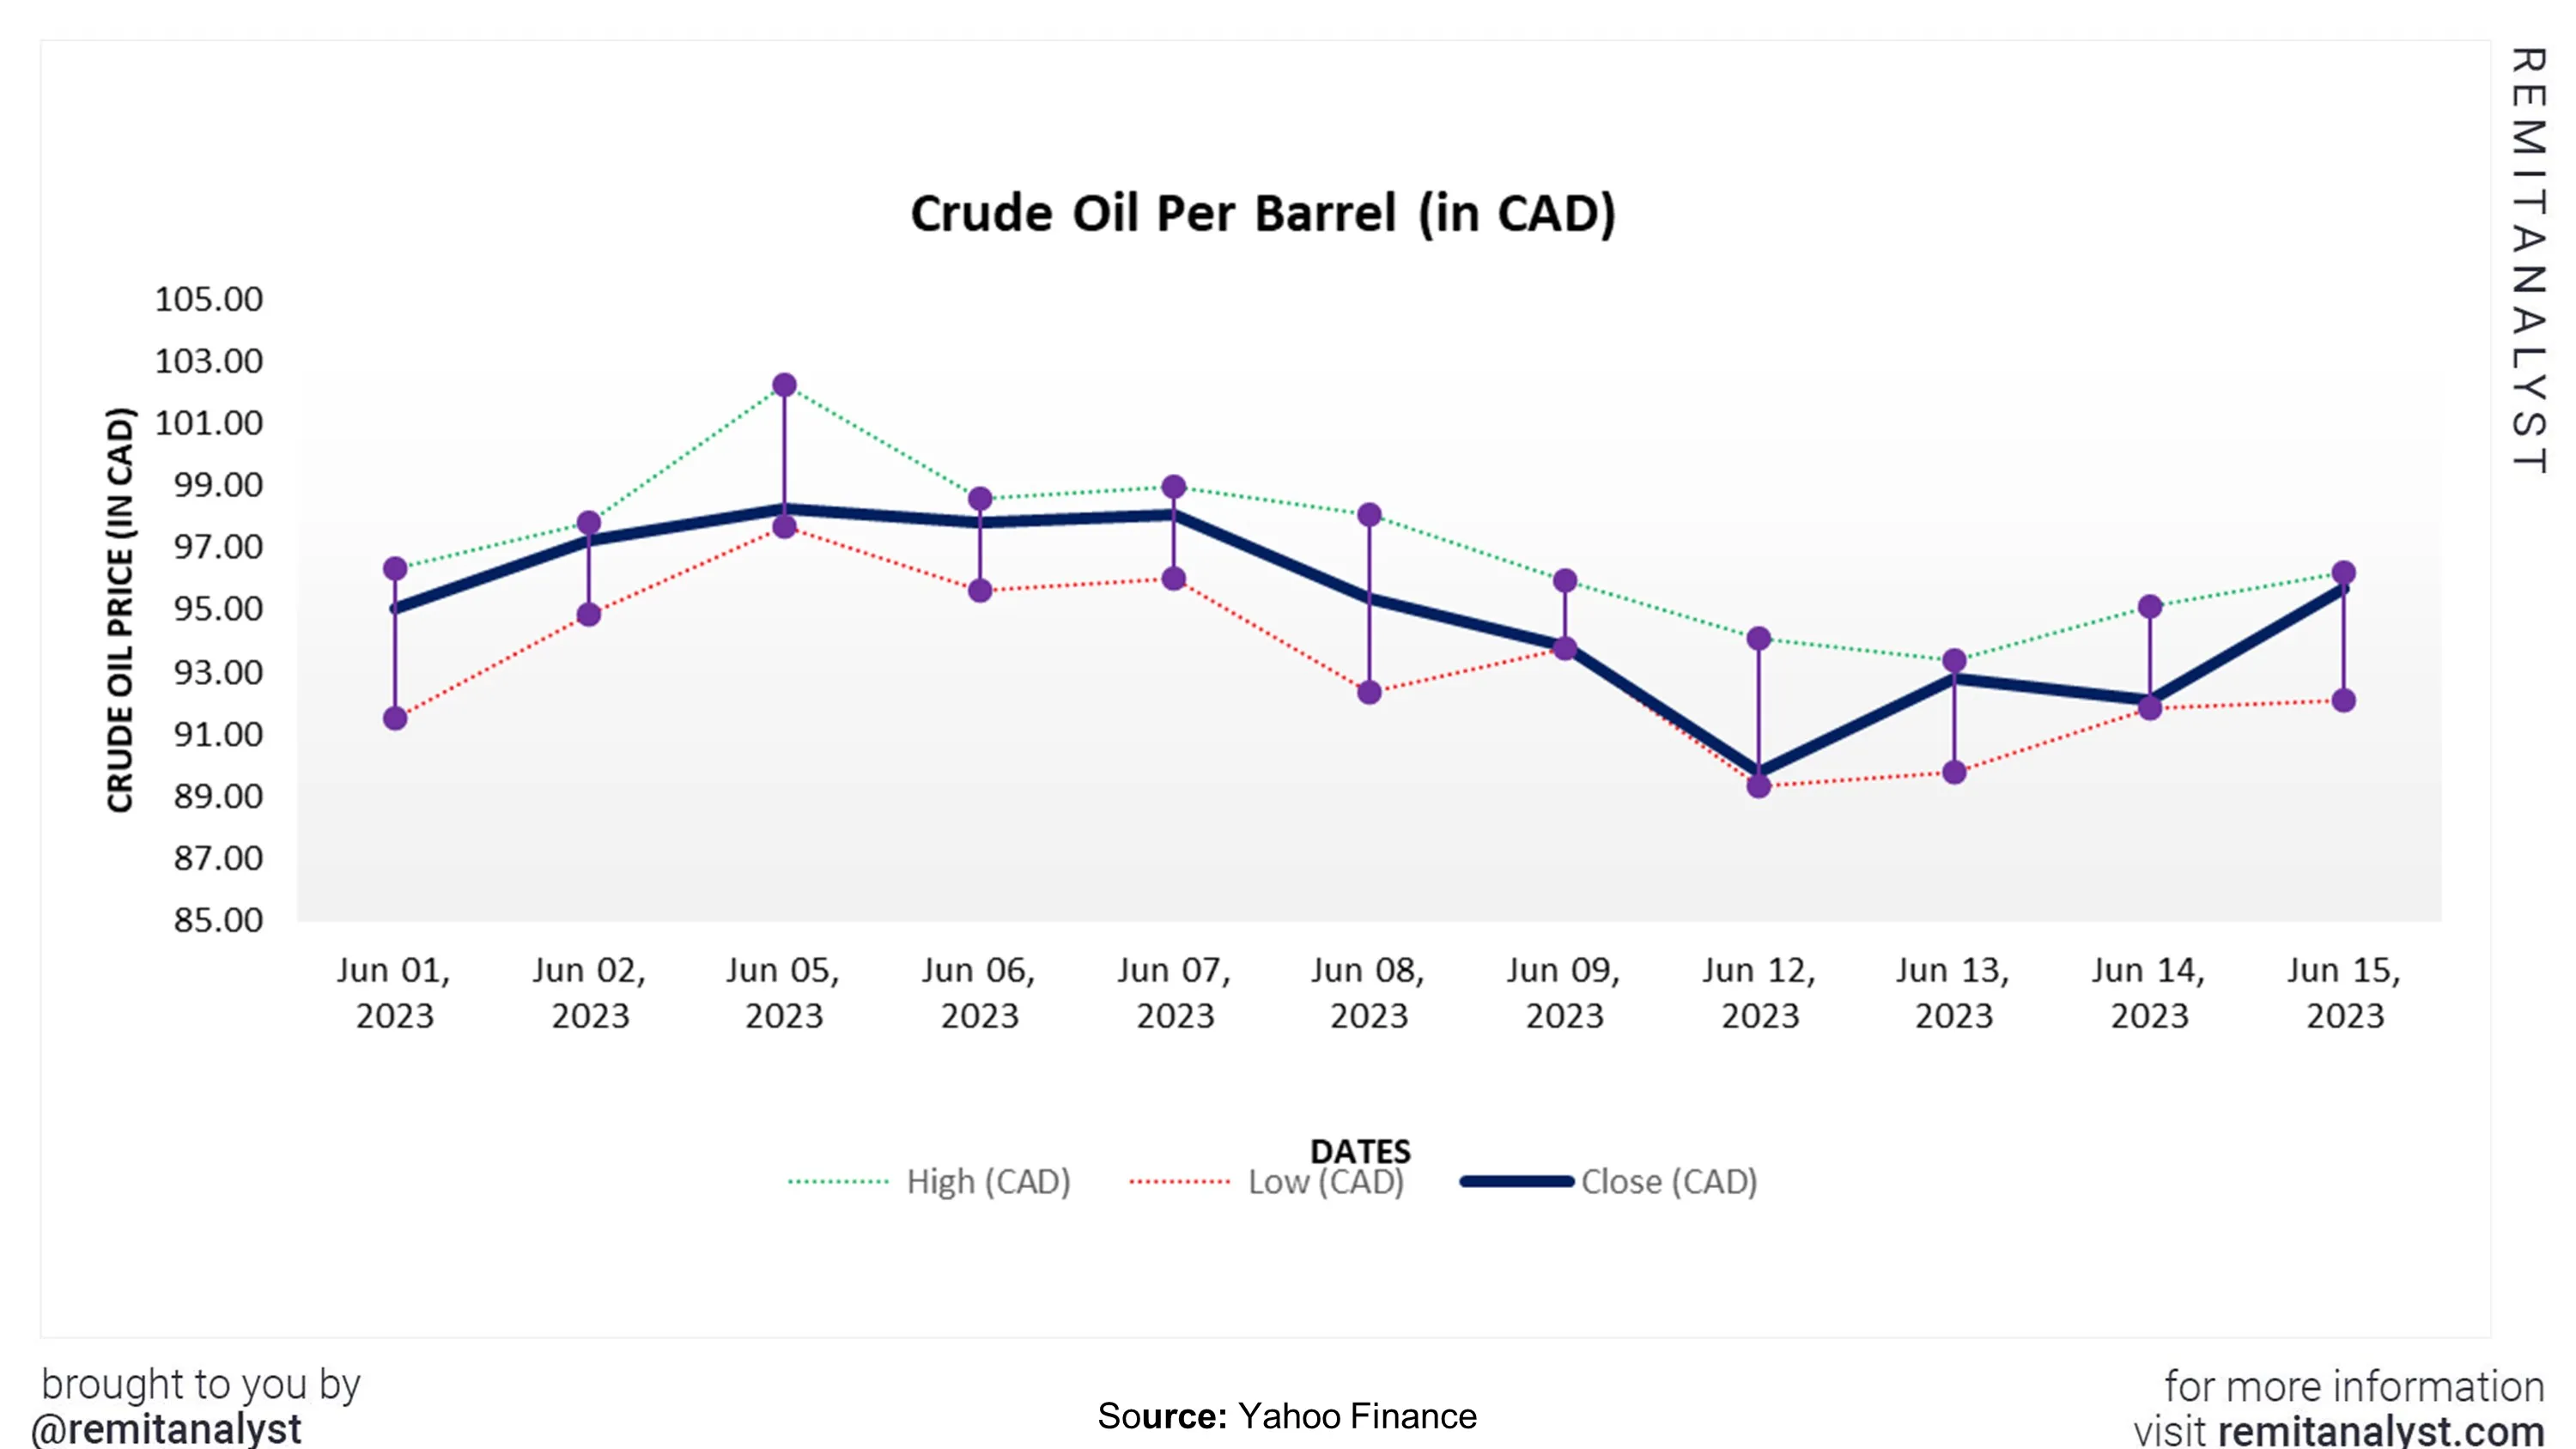 crude-oil-prices-canada-from-1-june-2023-to-15-june-2023